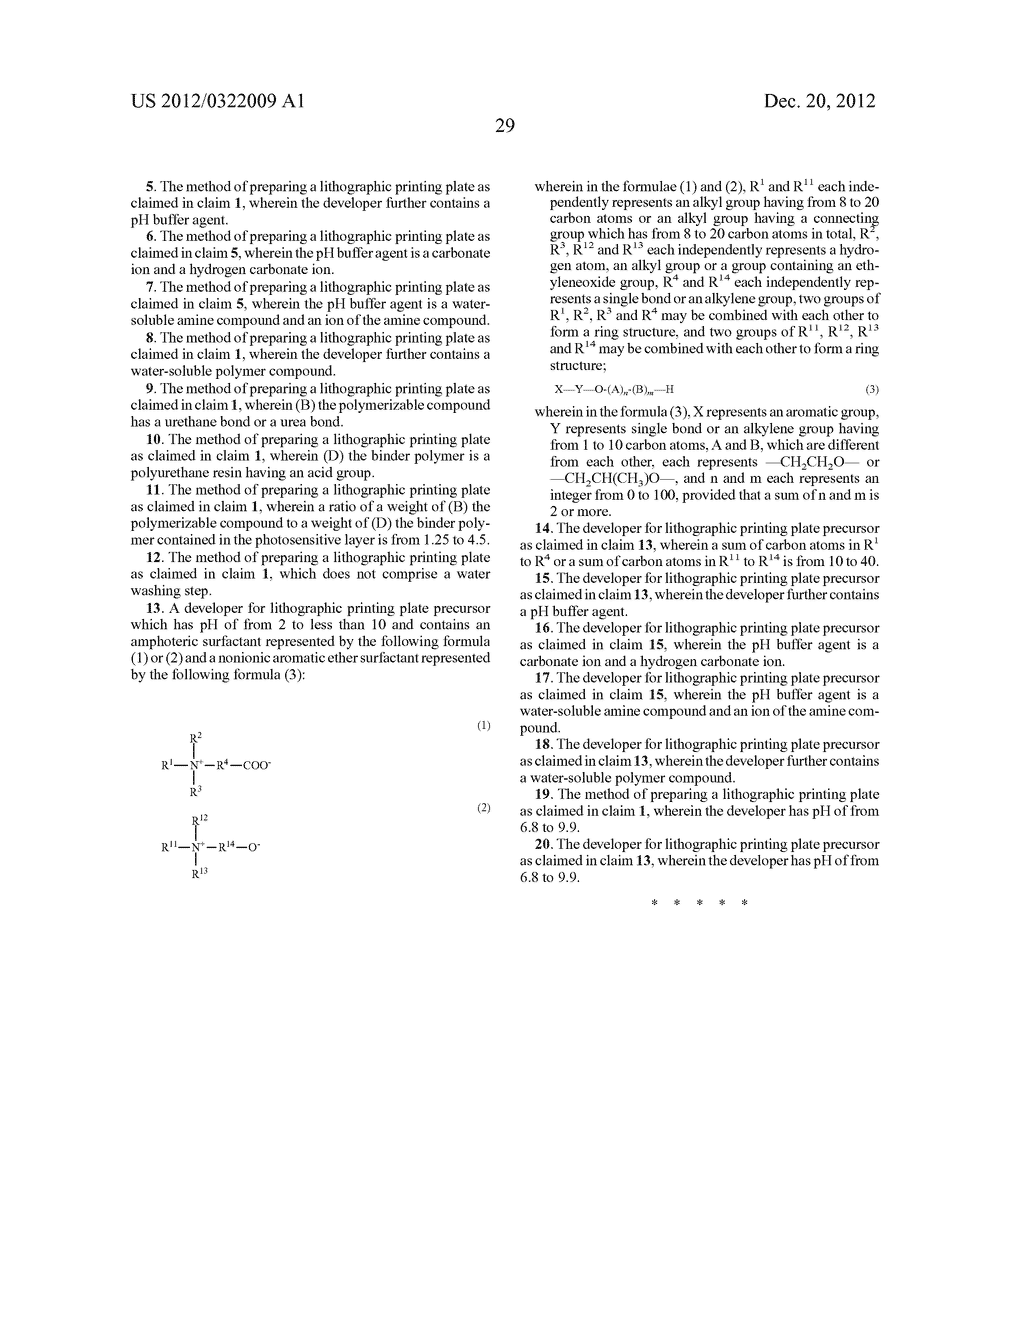 METHOD OF PREPARING LITHOGRAPHIC PRINTING PLATE AND DEVELOPER FOR     LITHOGRAPHIC PRINTING PLATE PRECURSOR - diagram, schematic, and image 31